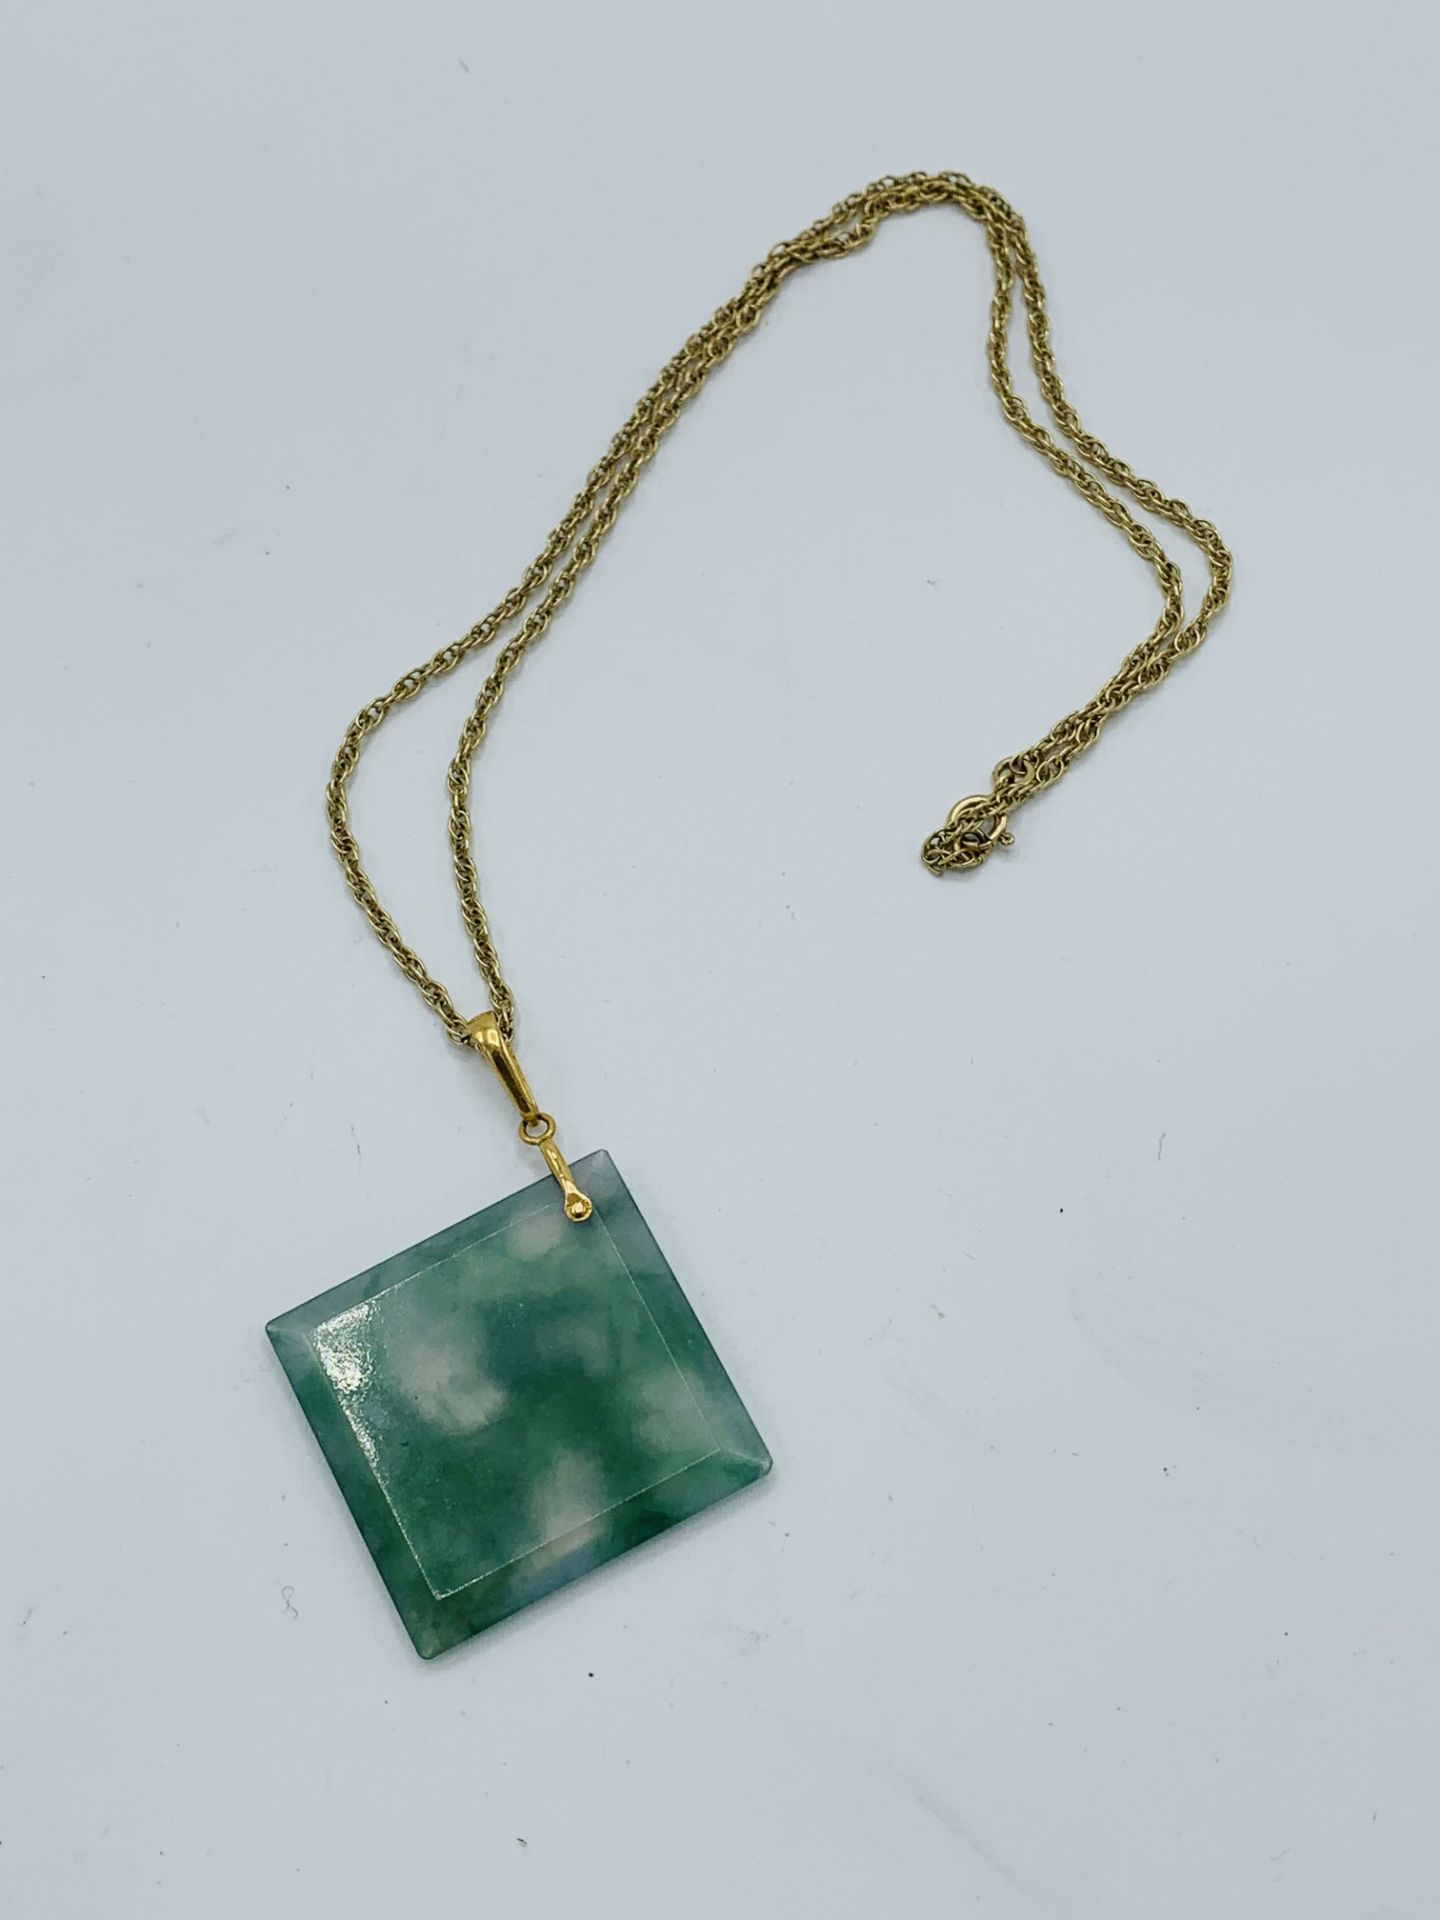 Square cut pendant of moss agate with gold bale and 9ct gold chain. - Image 2 of 2